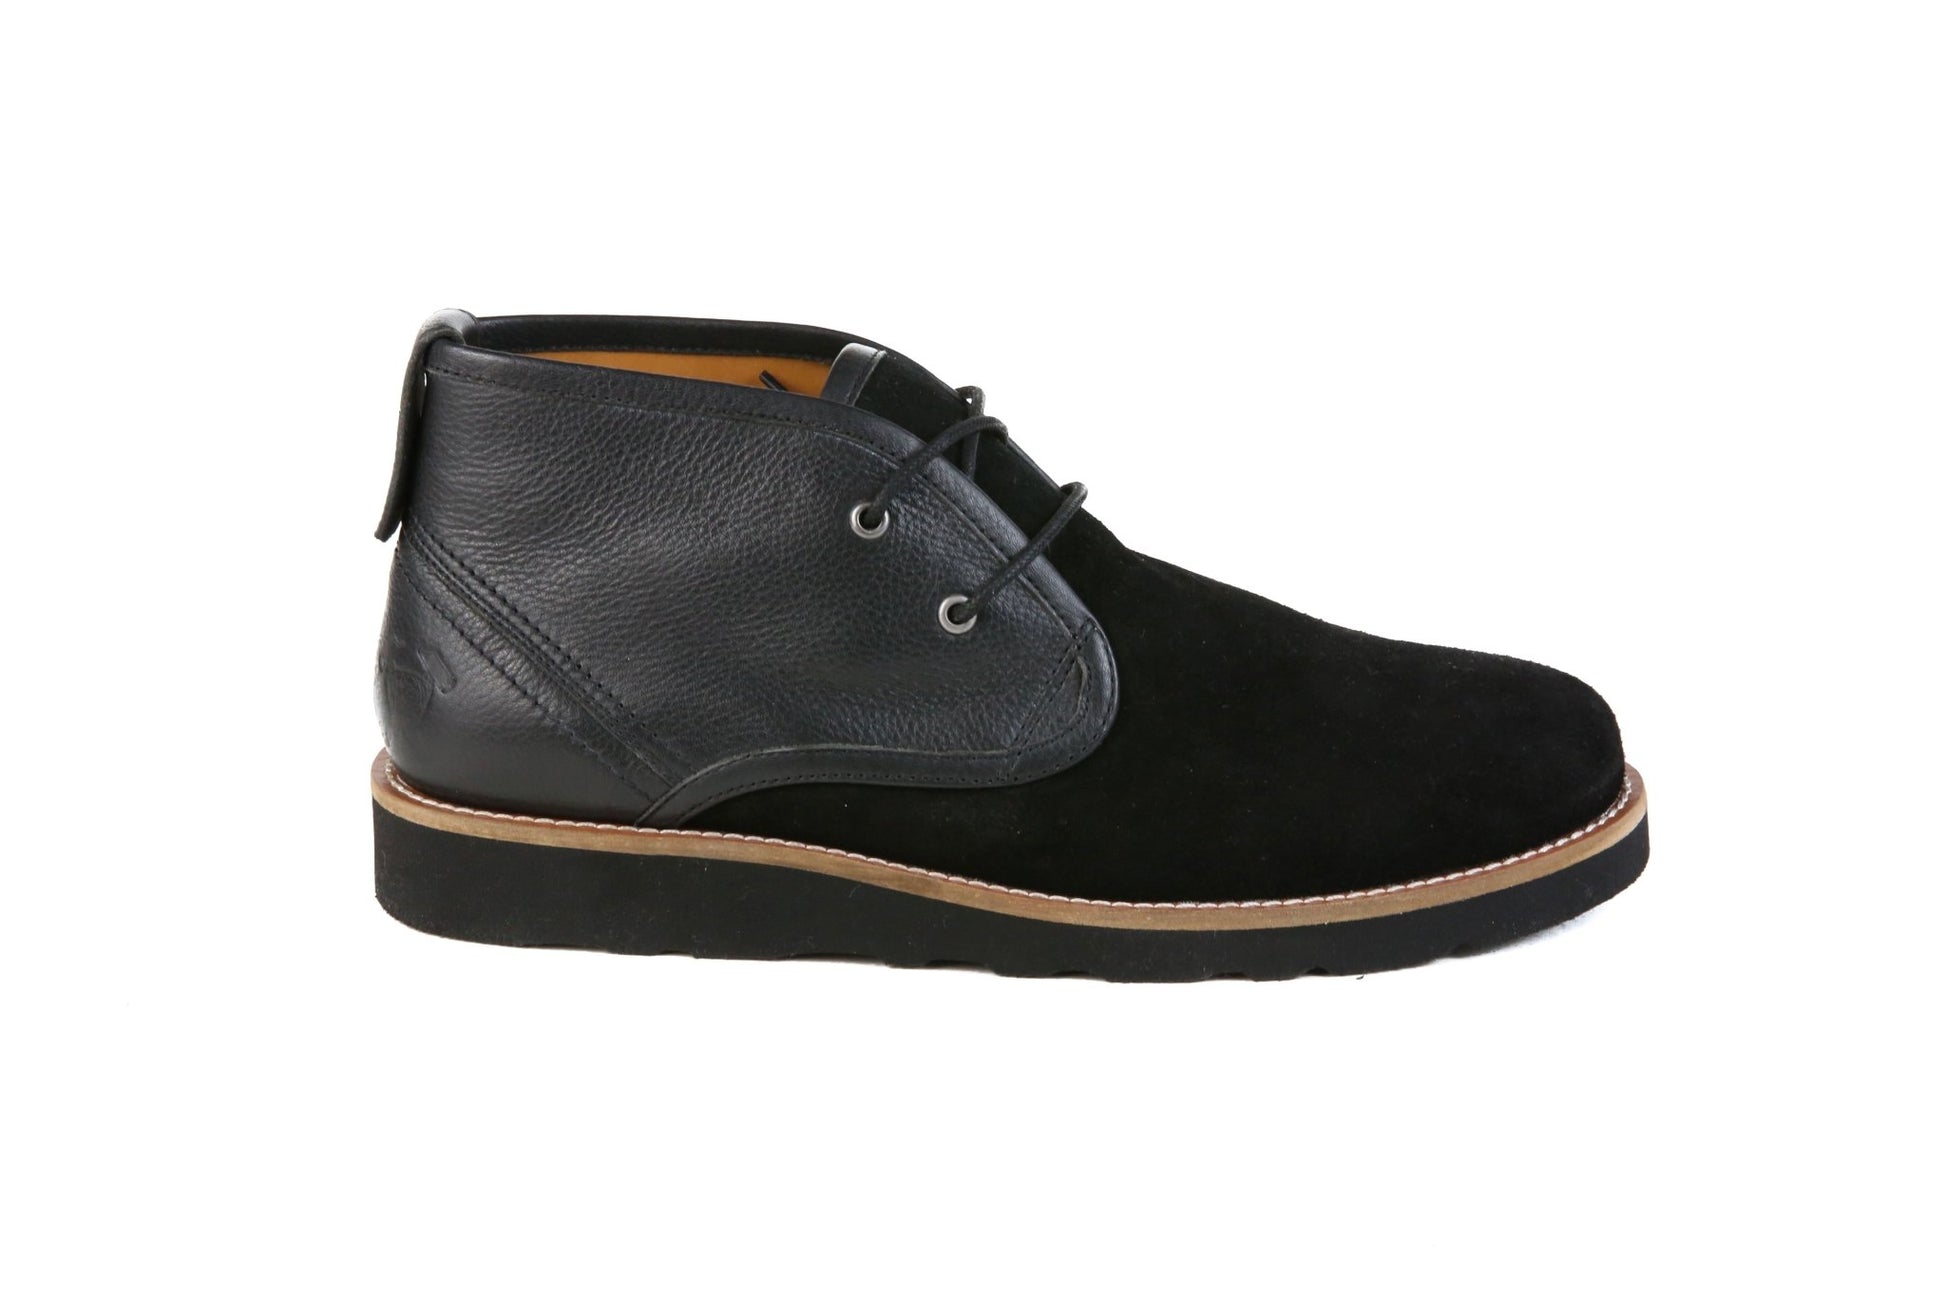 Hound & Hammer The Nolan | Black Ankle Boots for Men - Men - Footwear - Boots - Ankle Boots - Benn~Burry